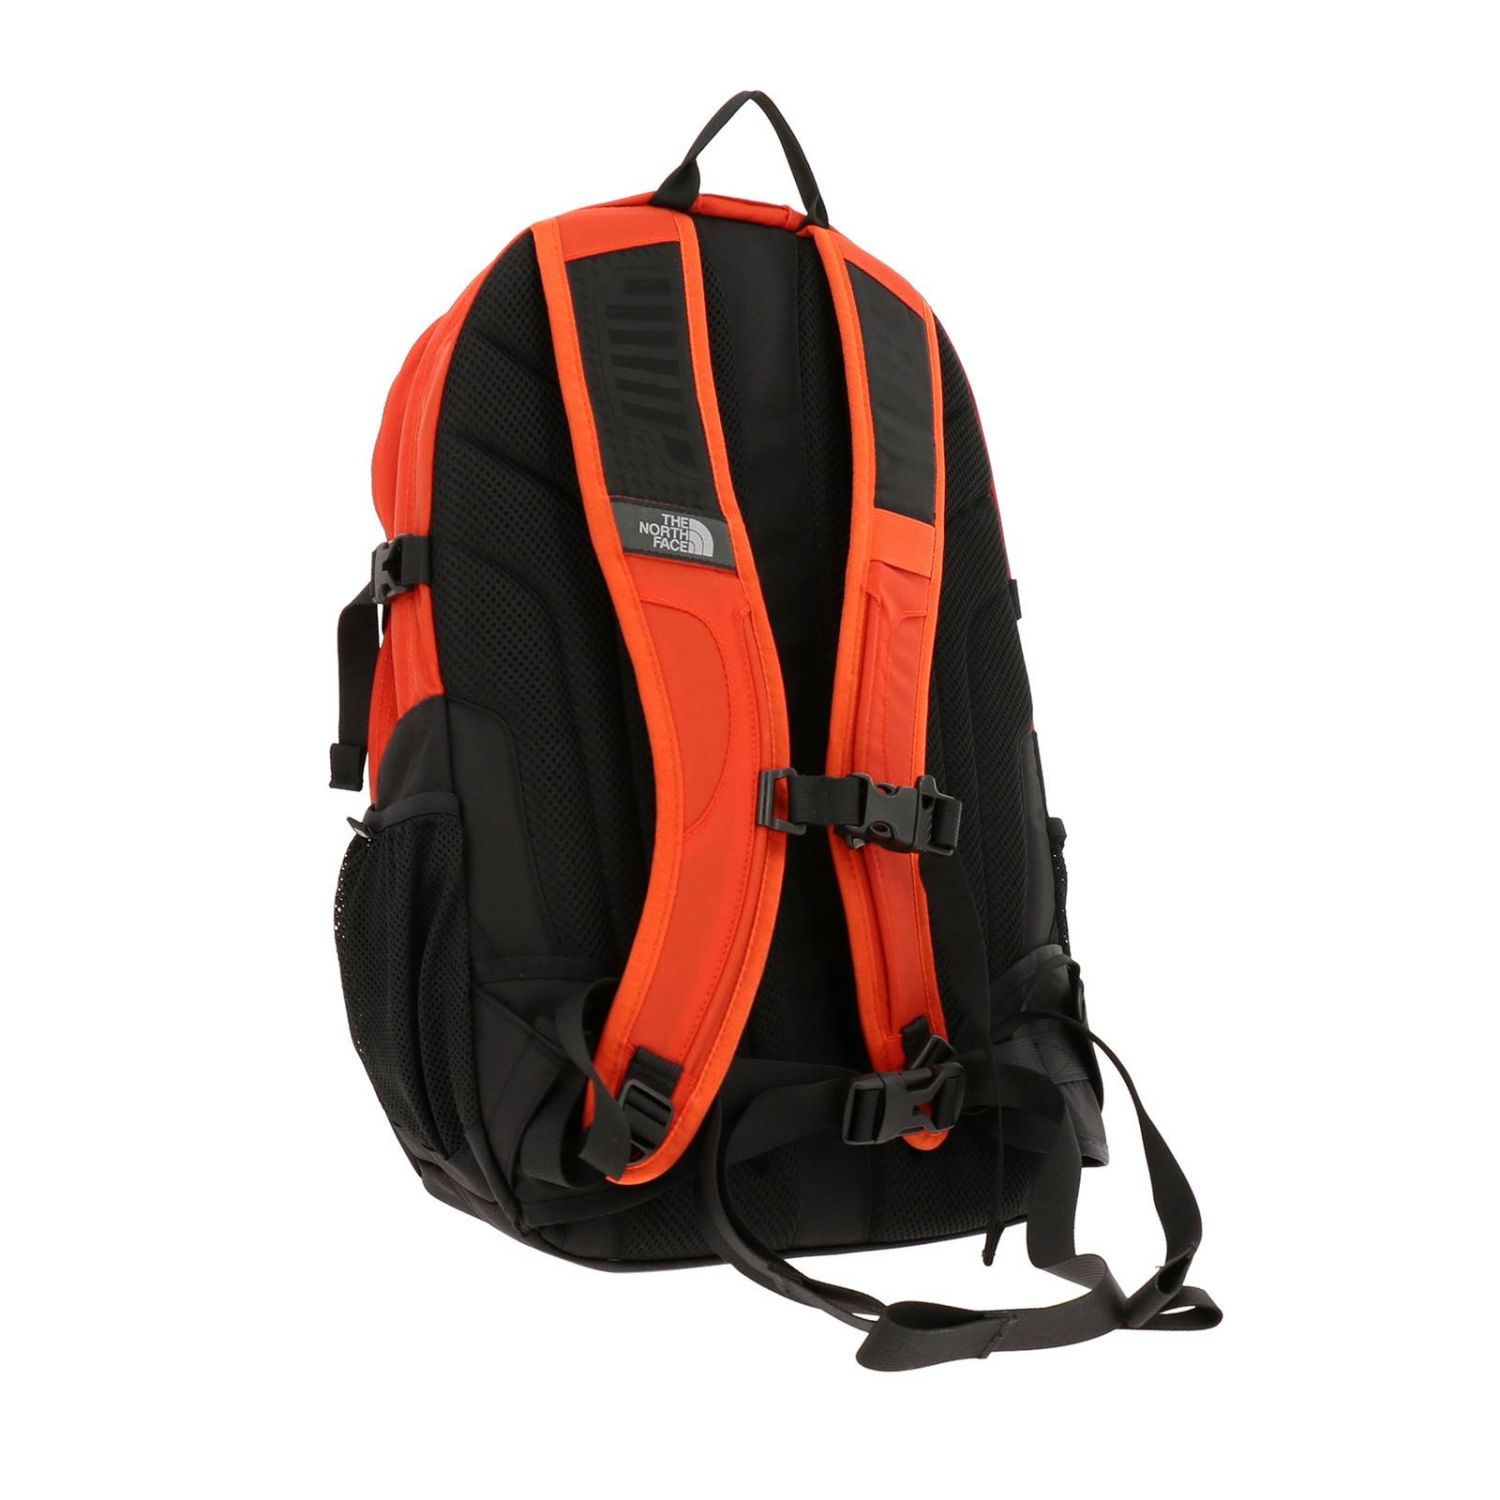 Backpack men The North Face | Backpack The North Face Men Red